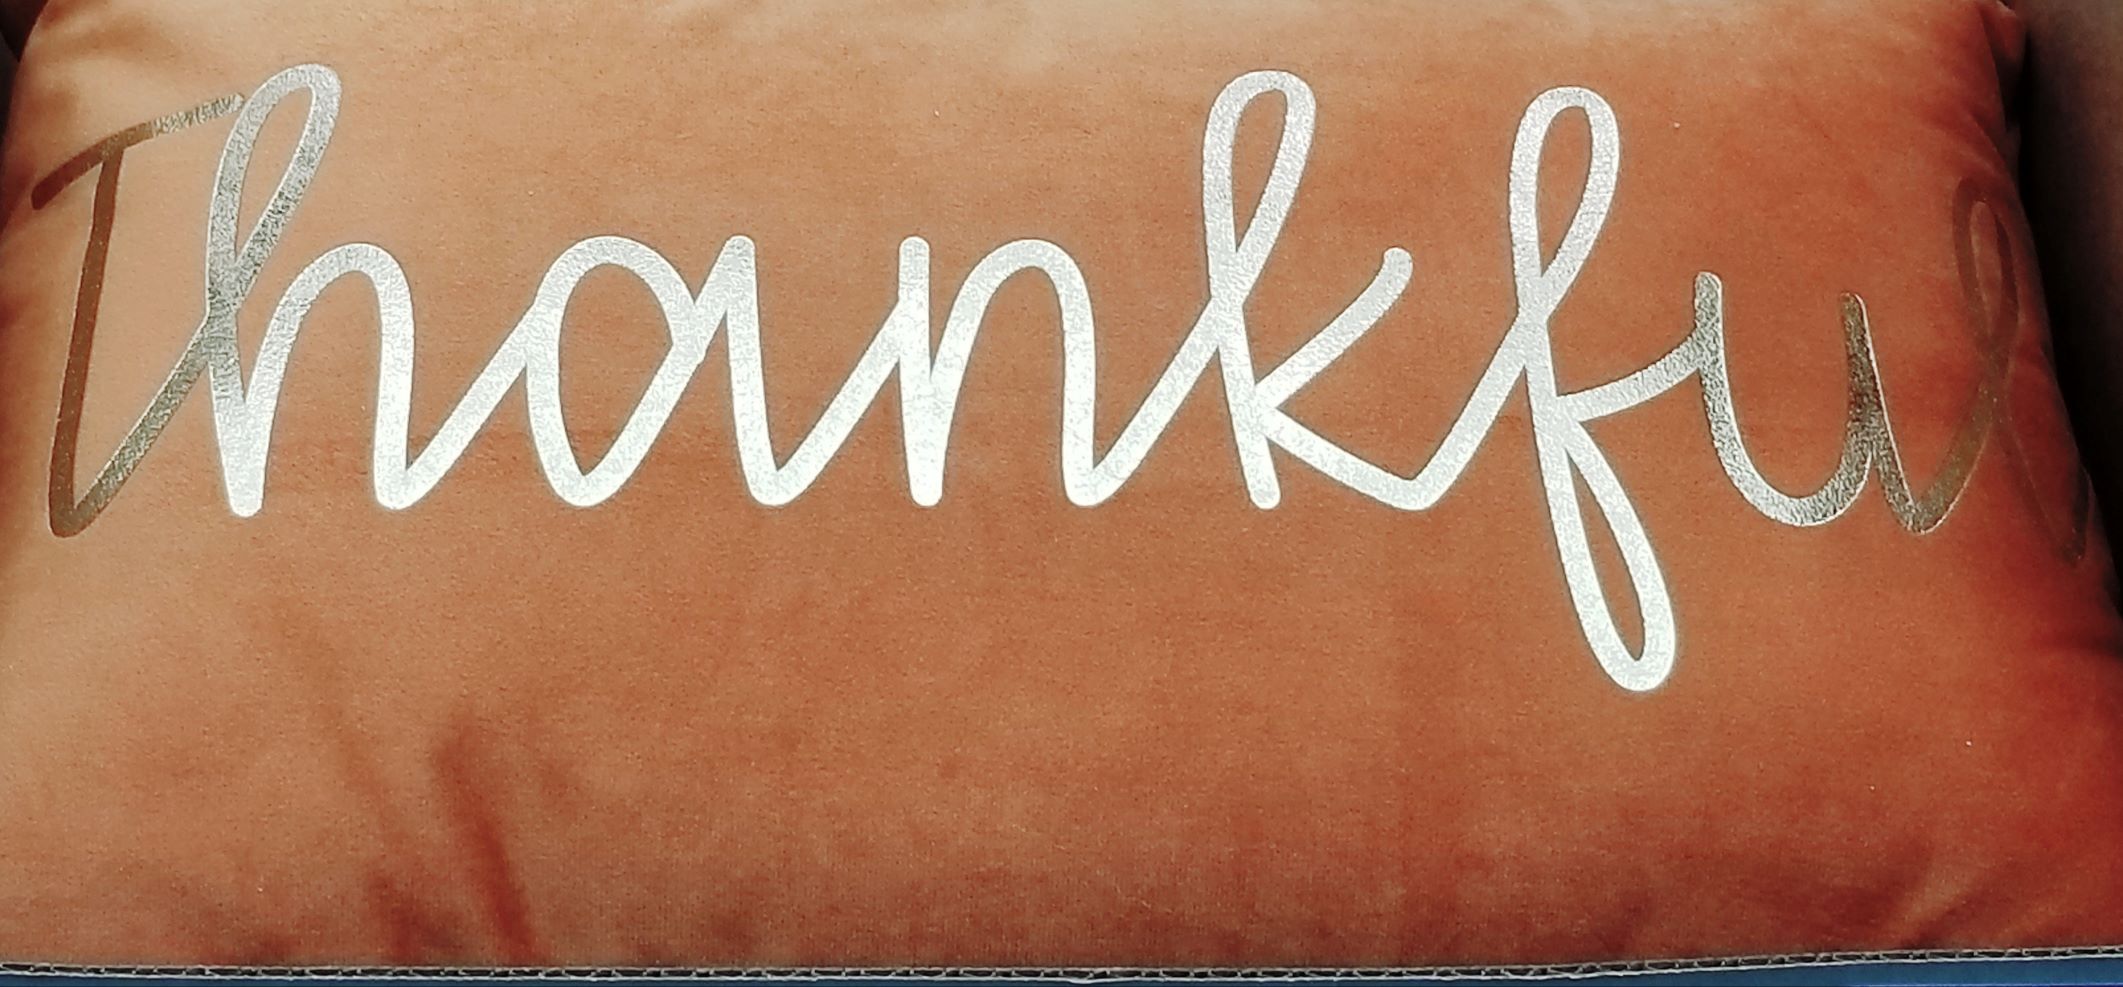 The words "thankful" in silver lettering on a peach background color